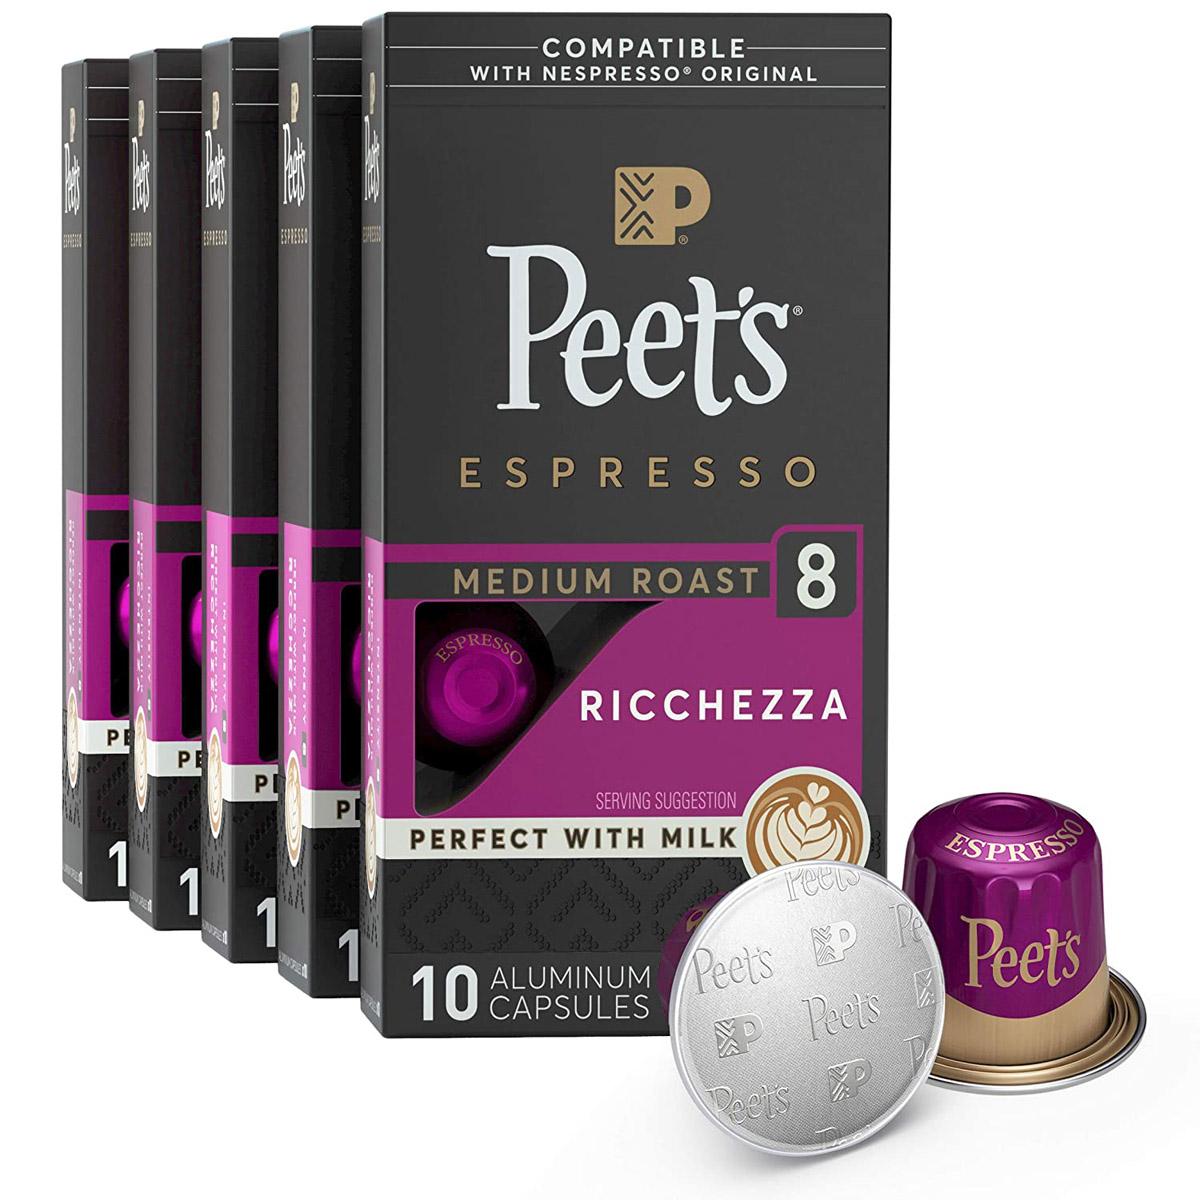 50 Peets Coffee Ricchezza Intensity 8 Nespresso Capsules for $19.69 Shipped